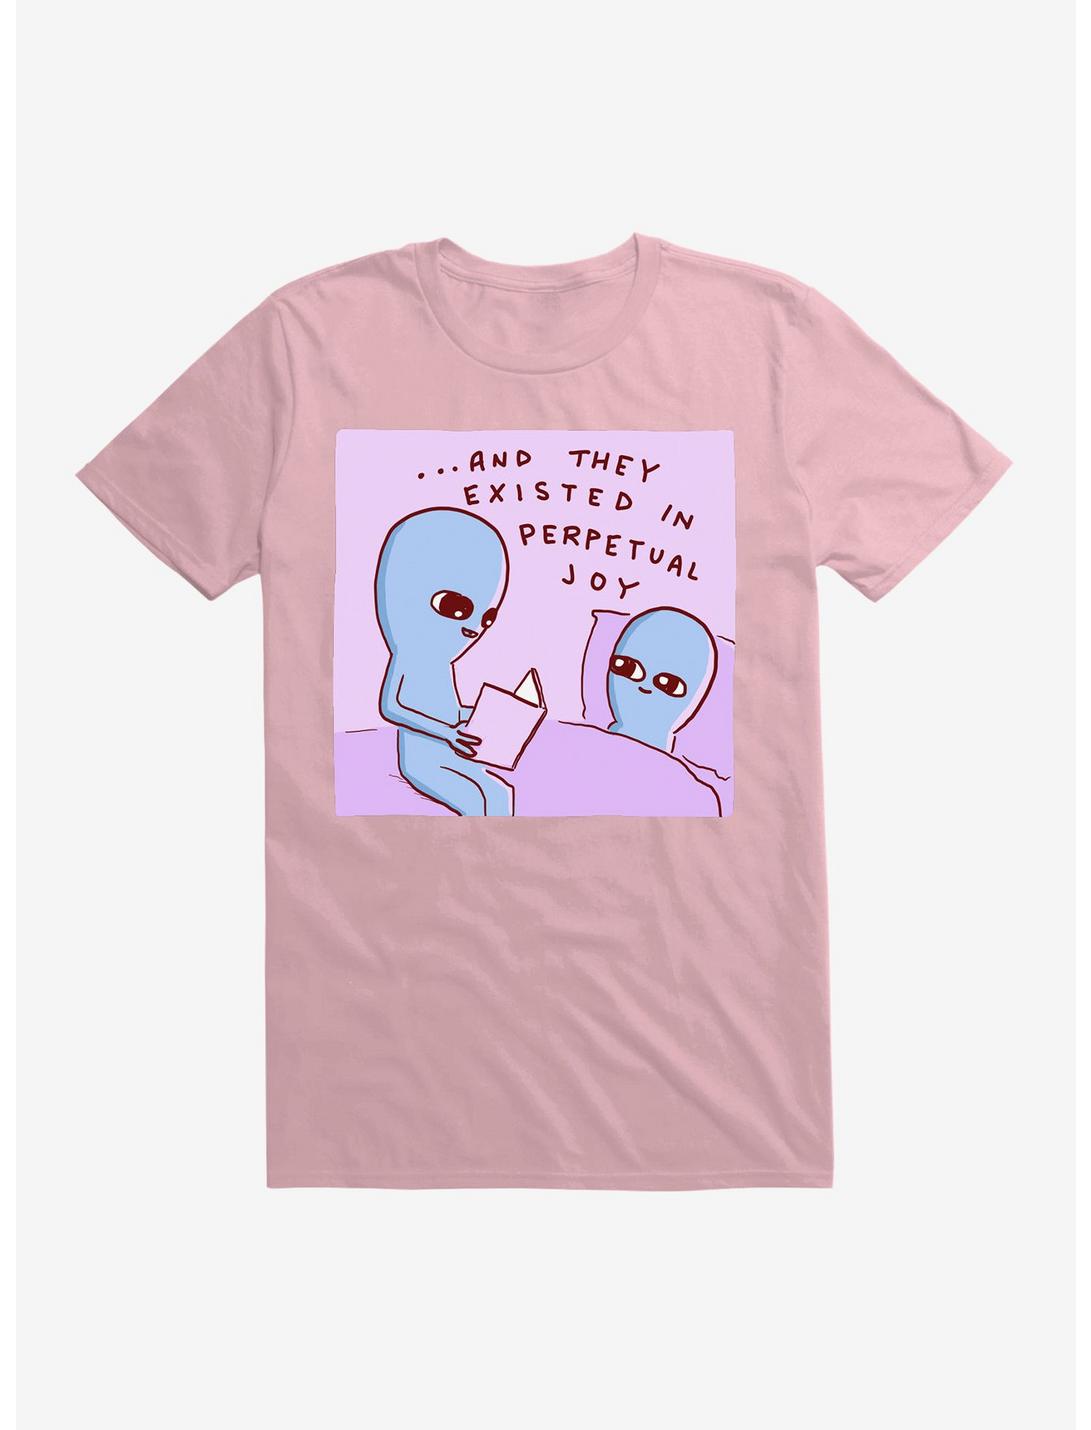 Strange Planet And They Existed In Perpetual Joy T-Shirt, LIGHT PINK, hi-res